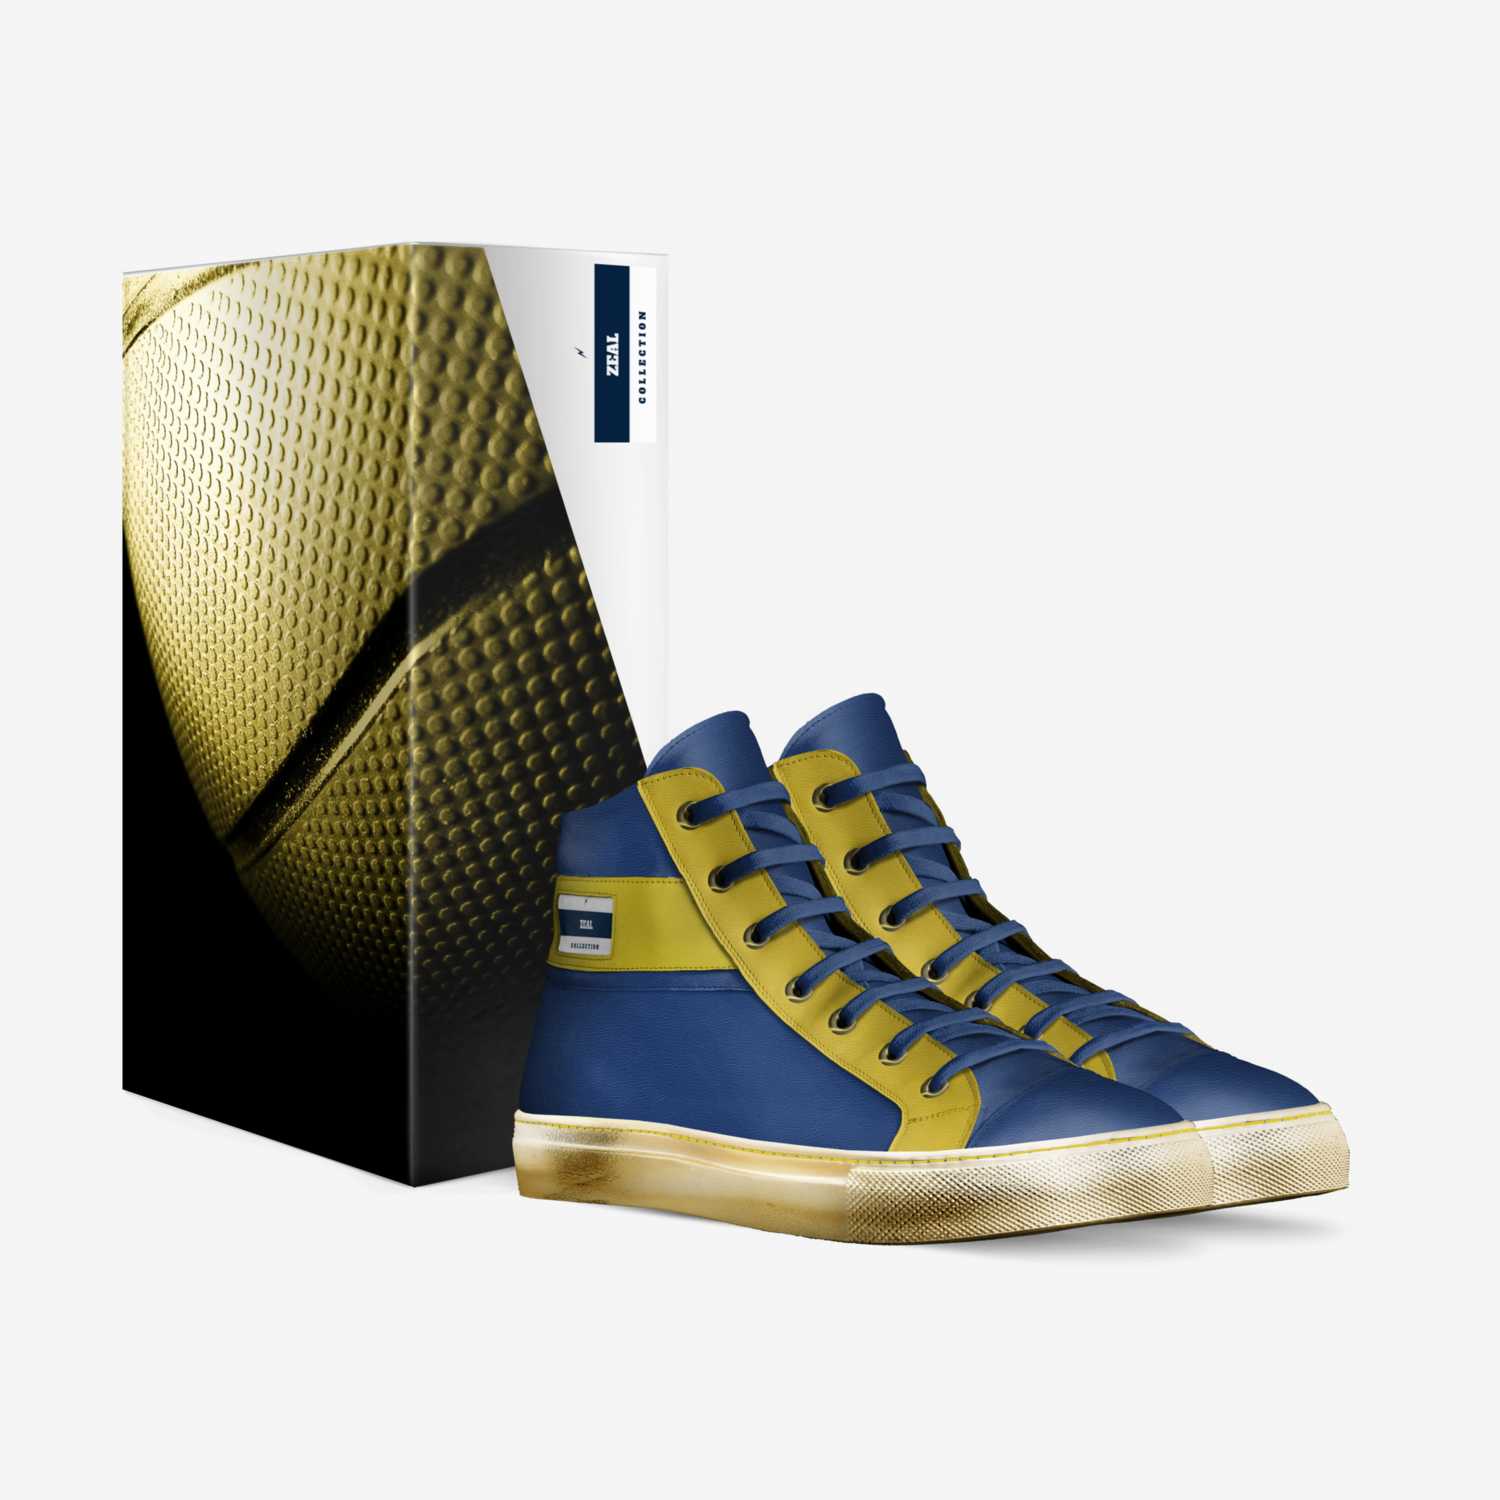 ZEAL G-DUB custom made in Italy shoes by Roderick Thompson | Box view